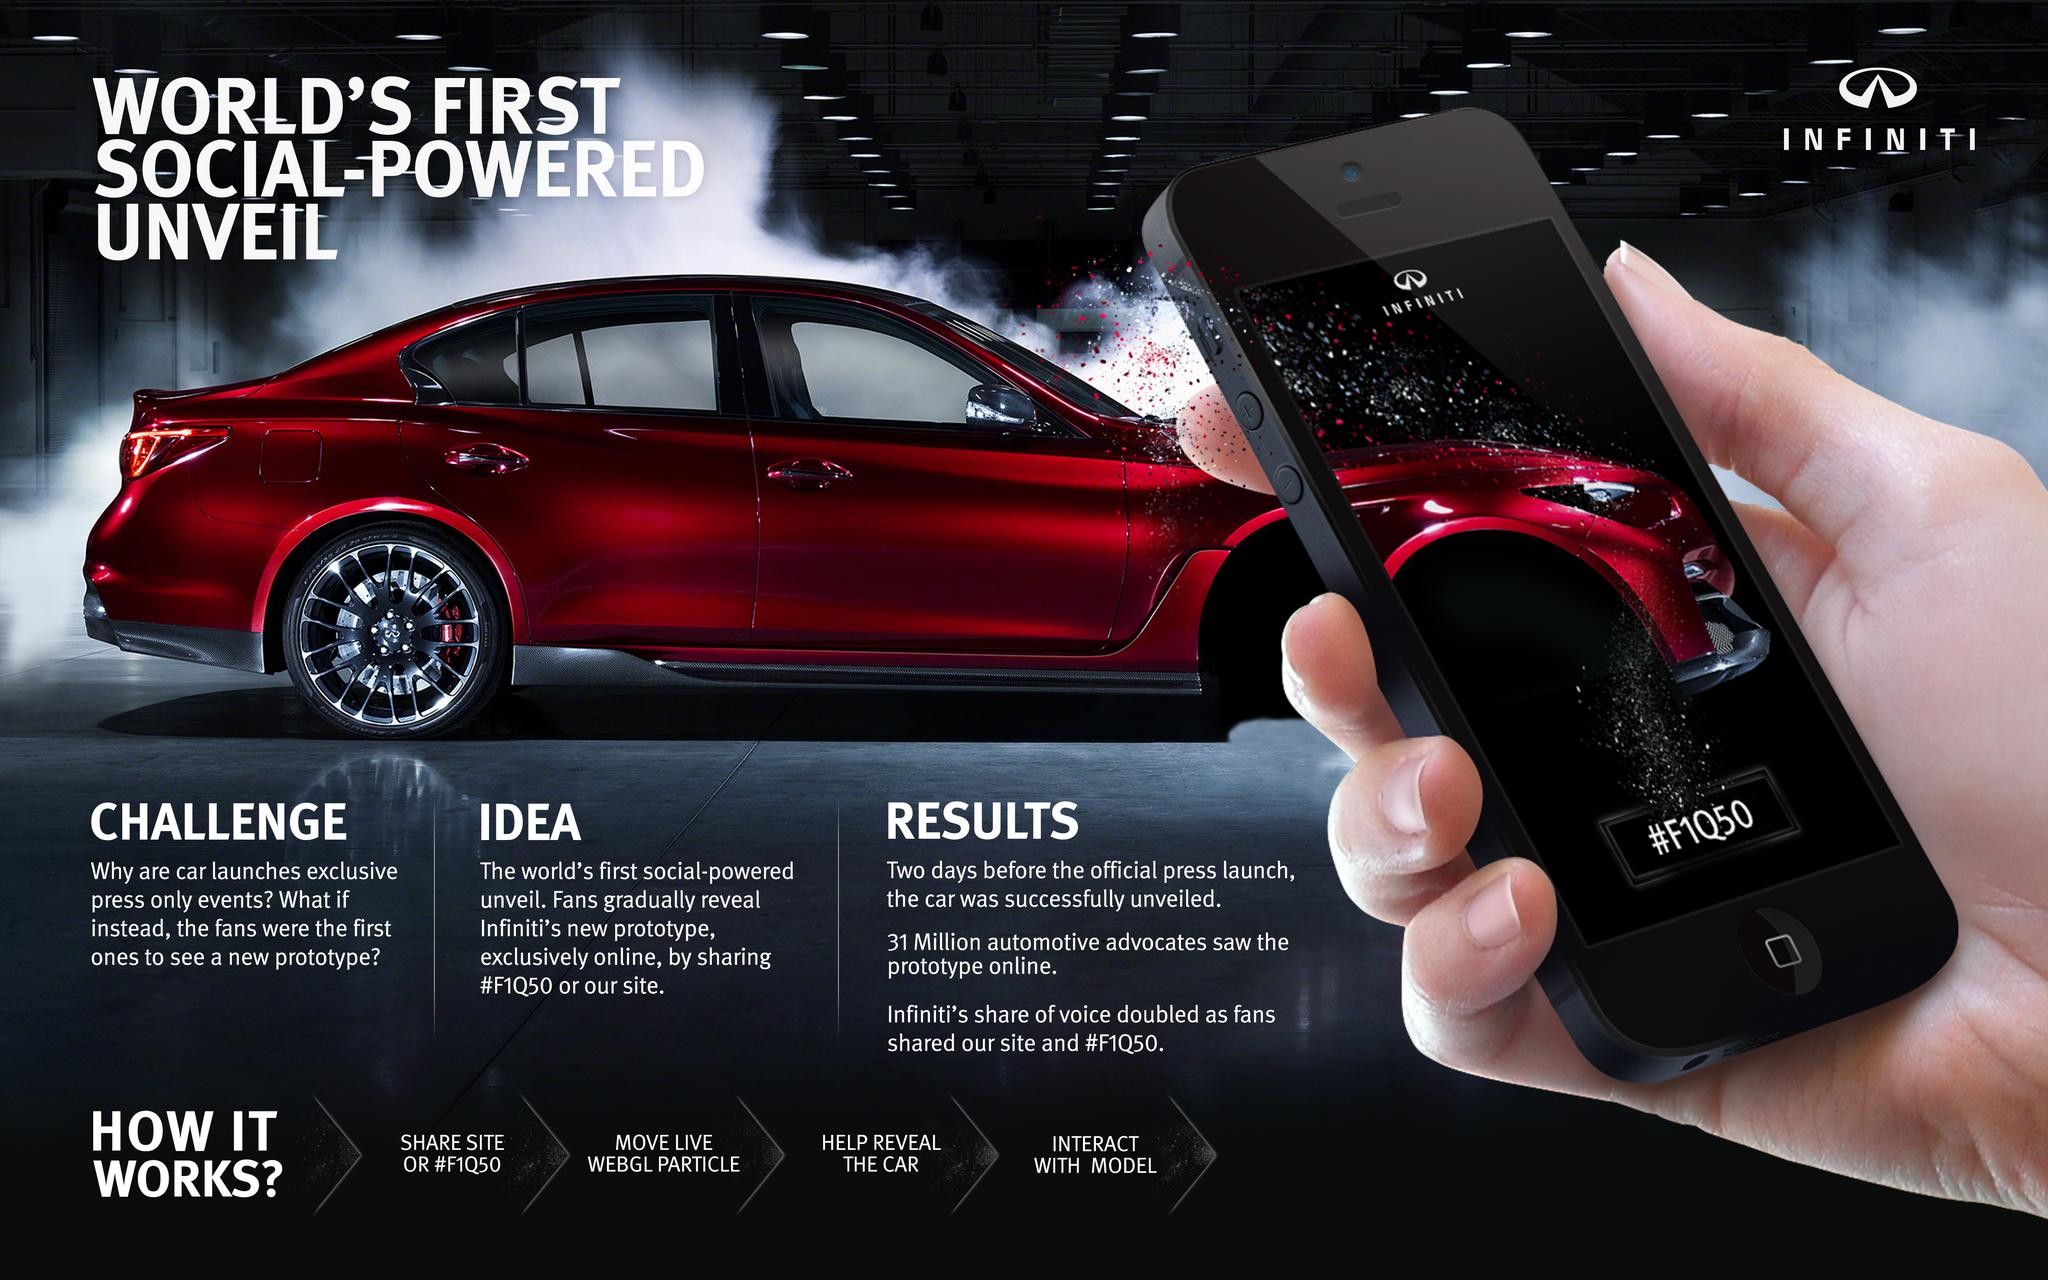 THE WORLD'S FIRST SOCIAL-POWERED UNVEIL - Q50 EAU ROUGE